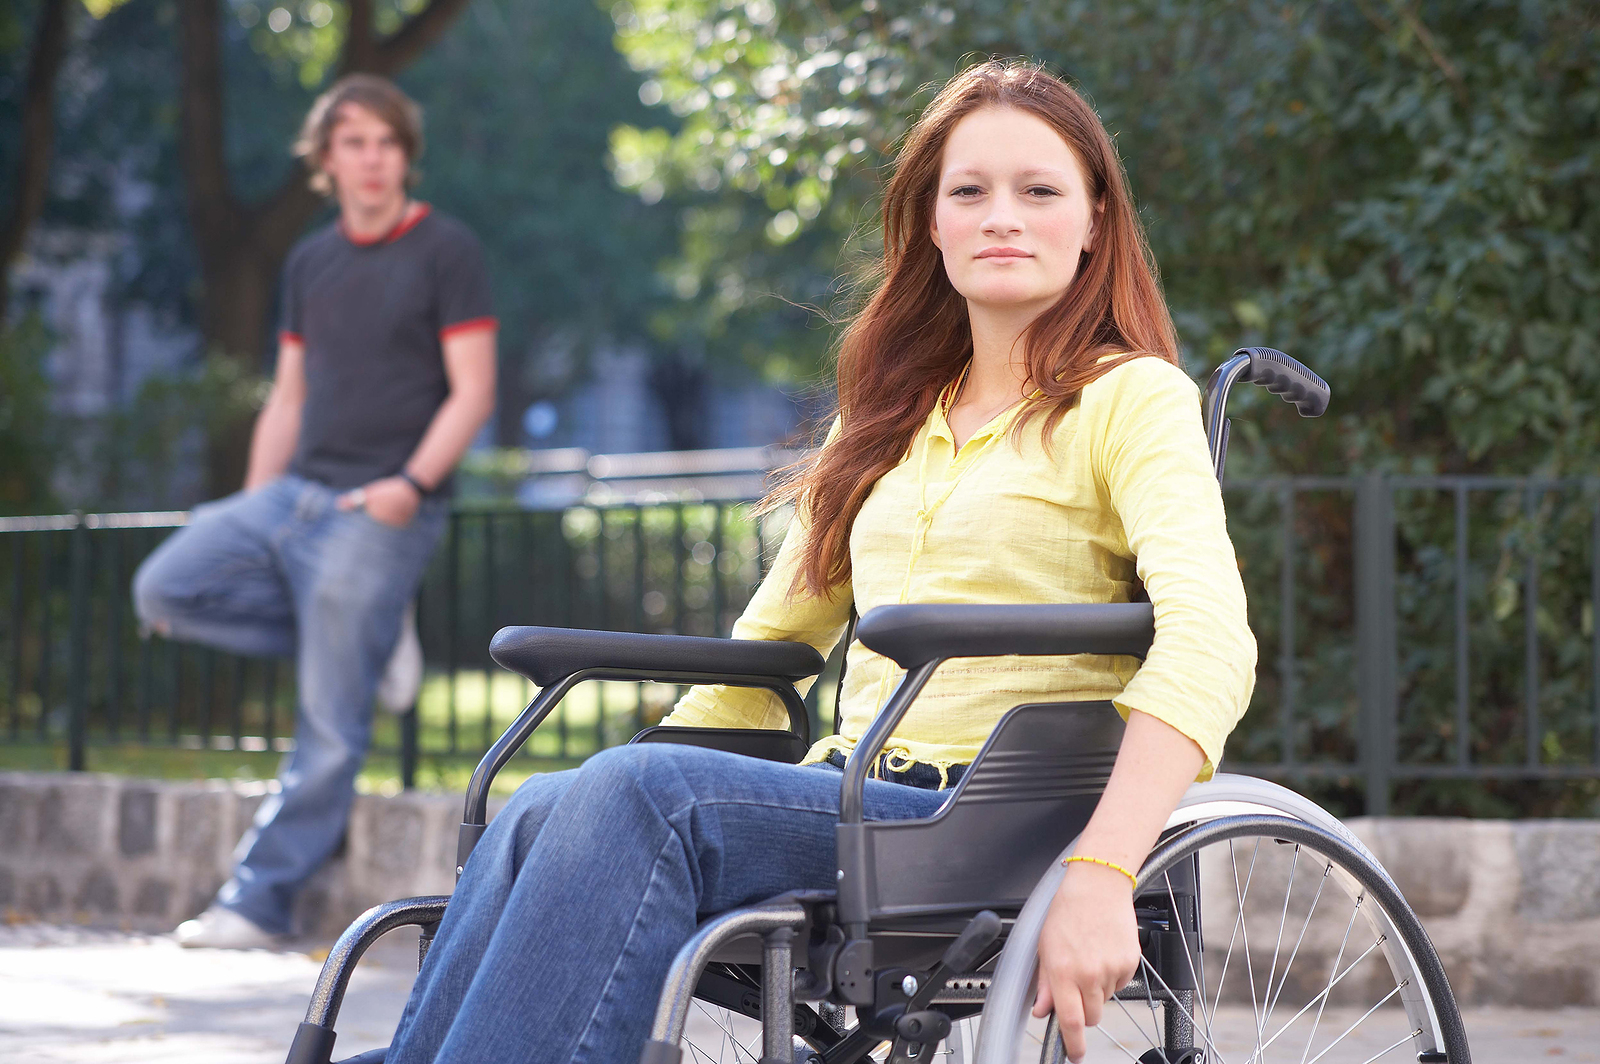 Redhaired teen in yellow shirt in wheelchair outside.